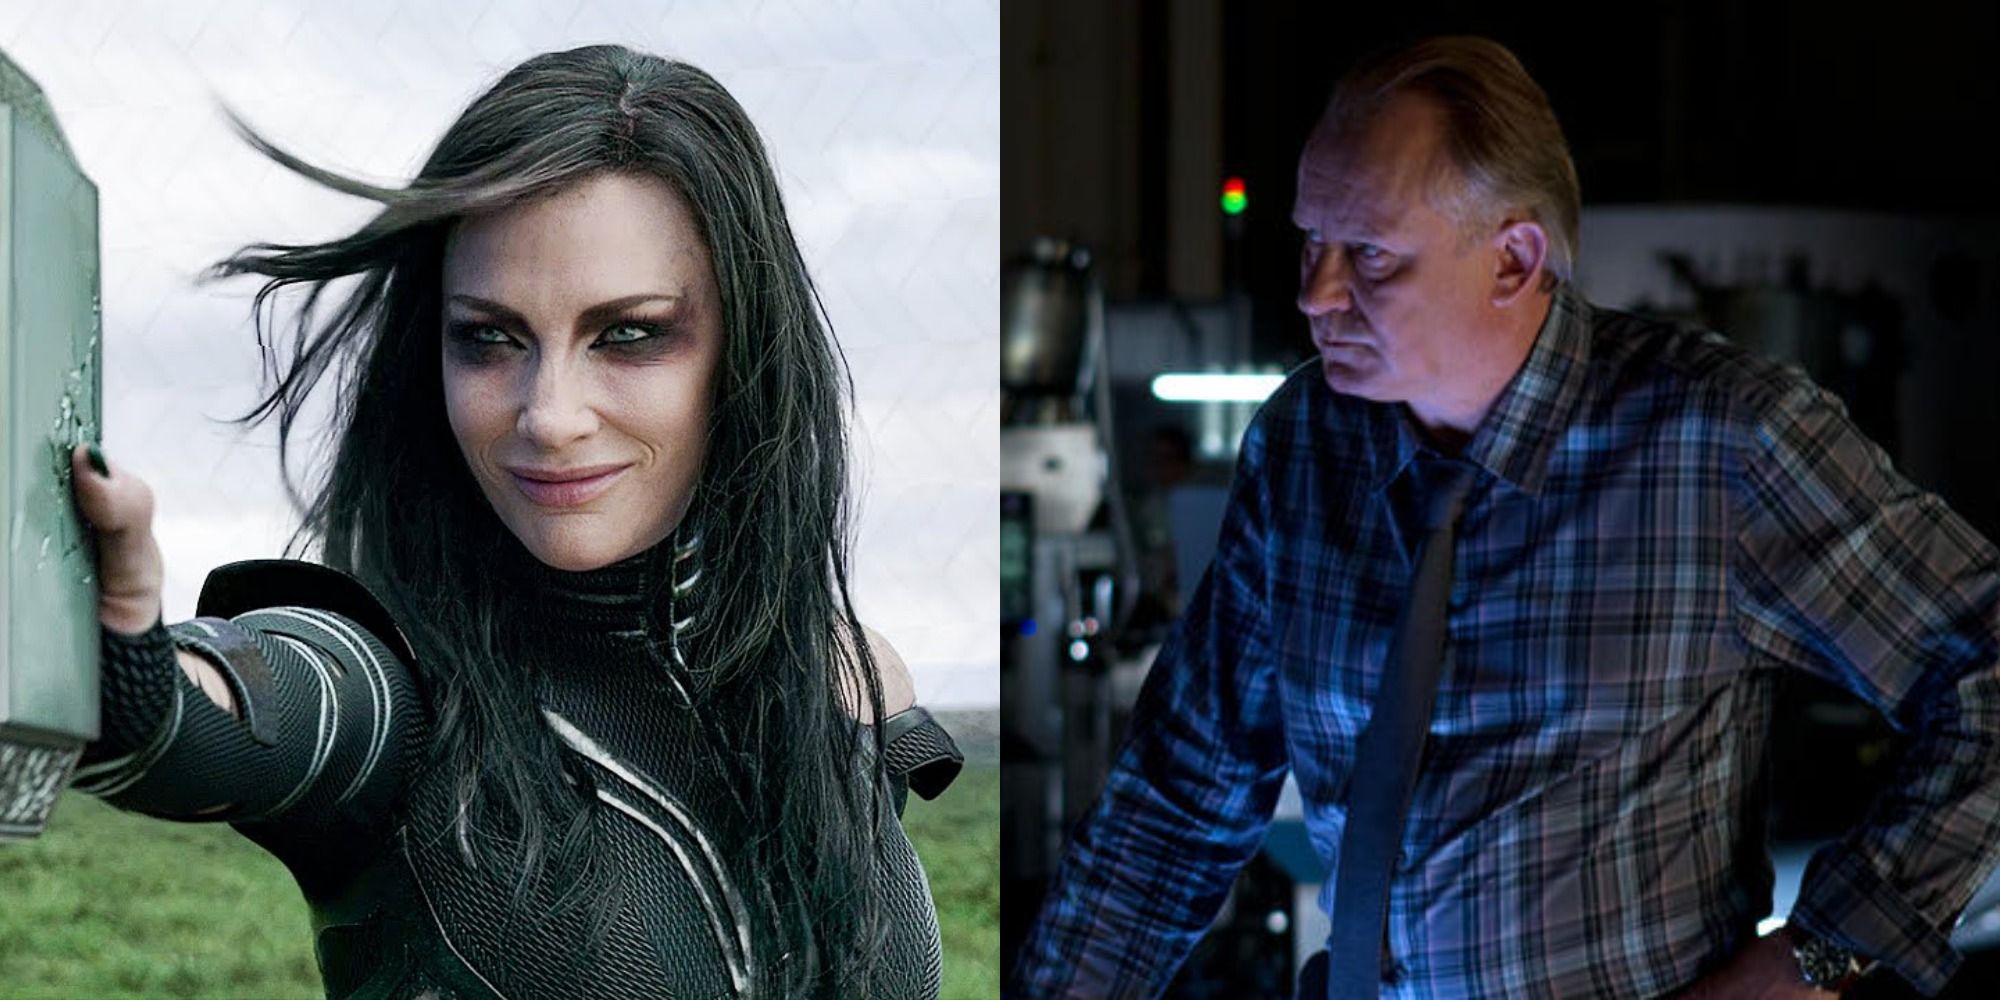 A split image of Hela and Selvig in the MCU